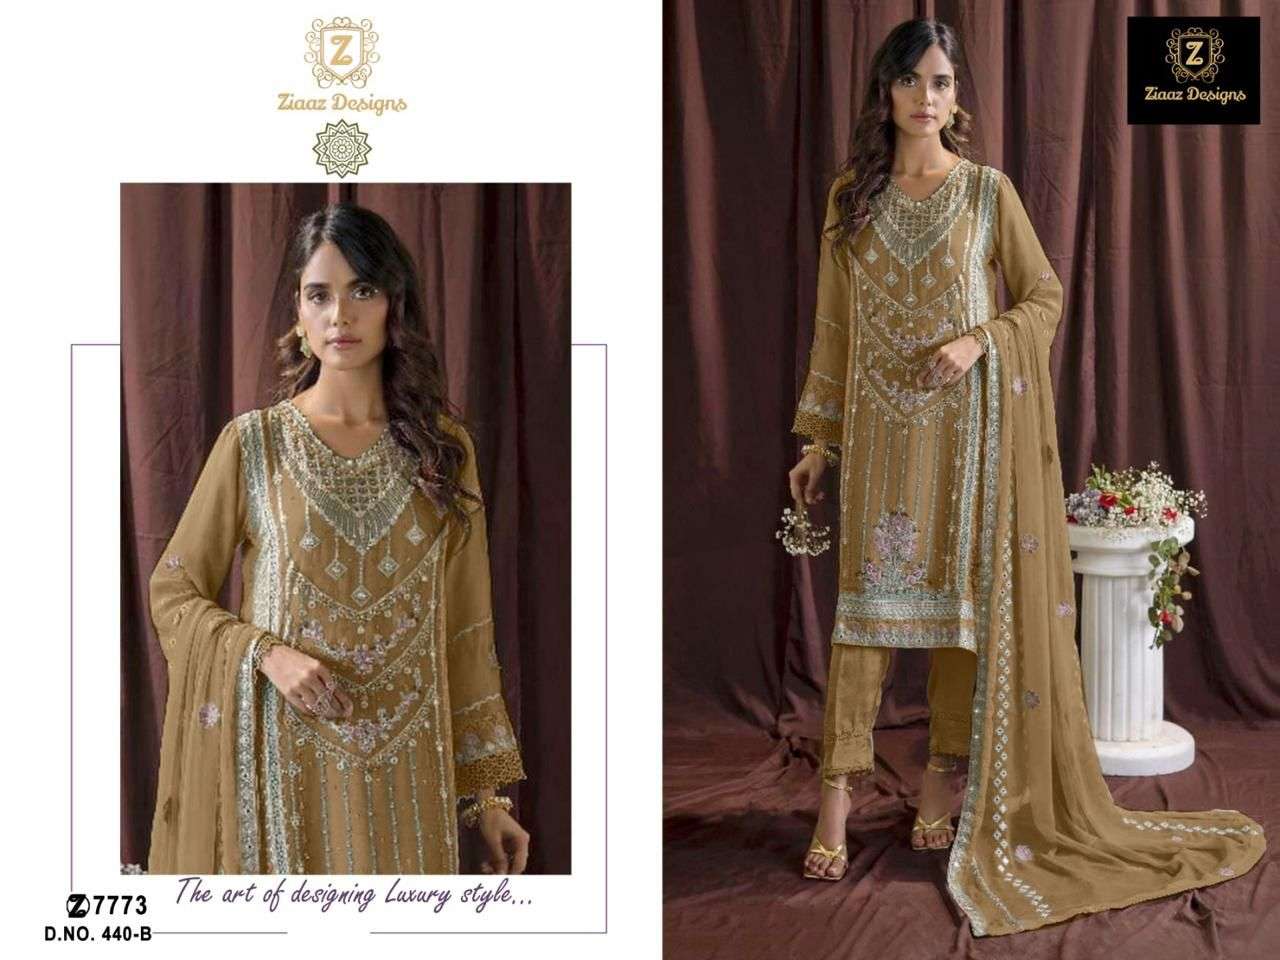 Ziaaz Designs 440 Georgette Pearl Embroidered Pakistani Suits Wholesale catalog